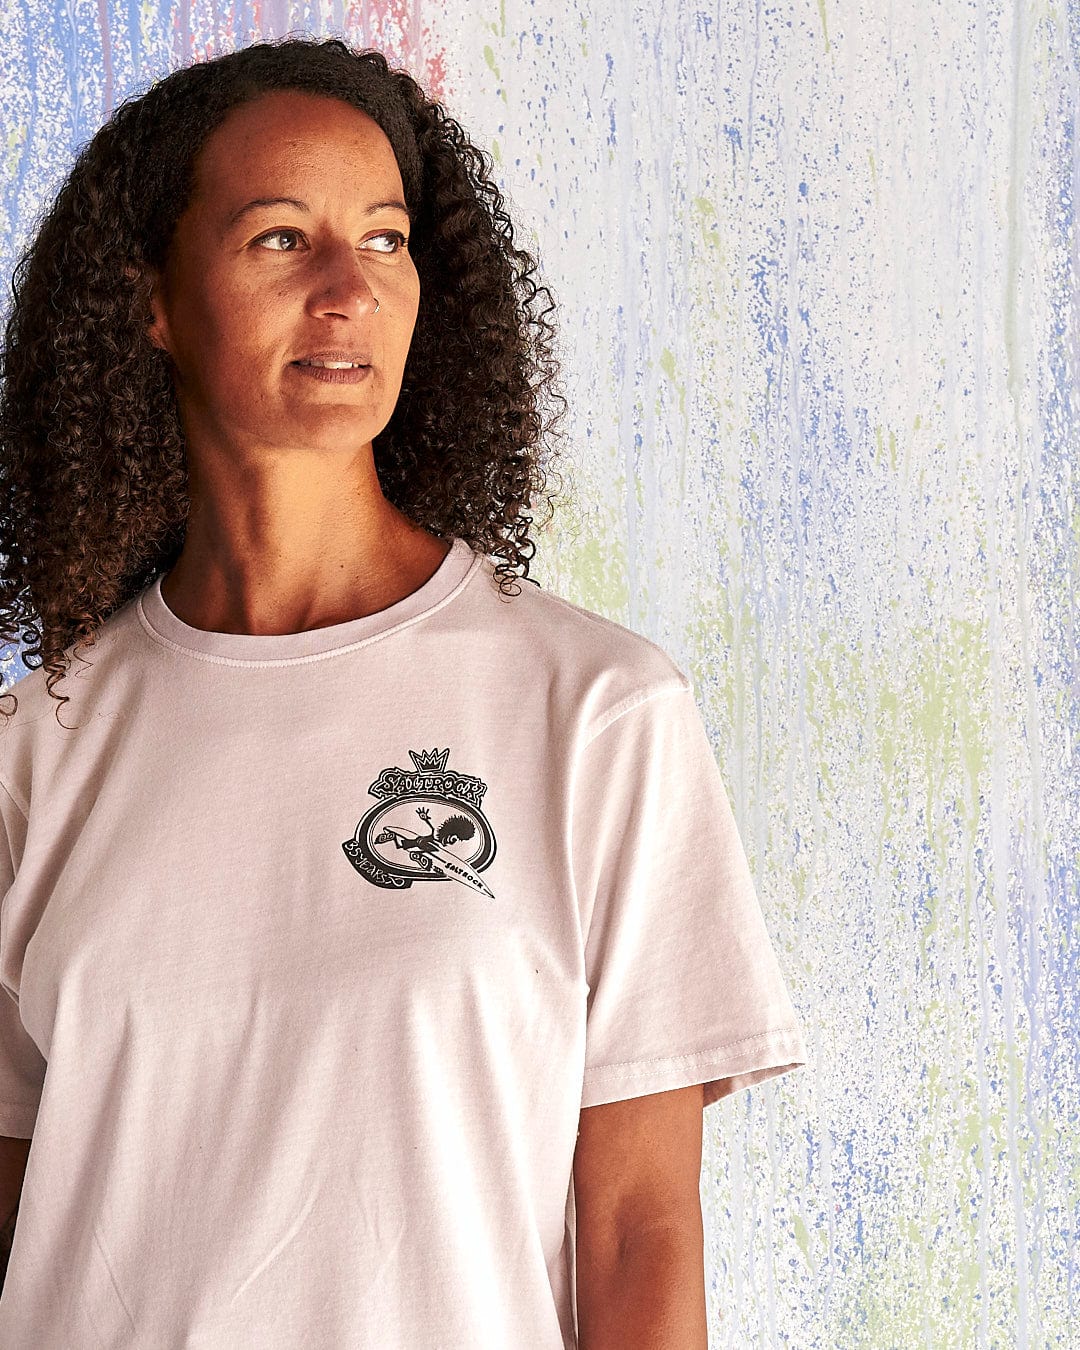 A woman with curly hair wearing a Saltrock Balls To The Wall - Limited Edition 35 Years T-Shirt.